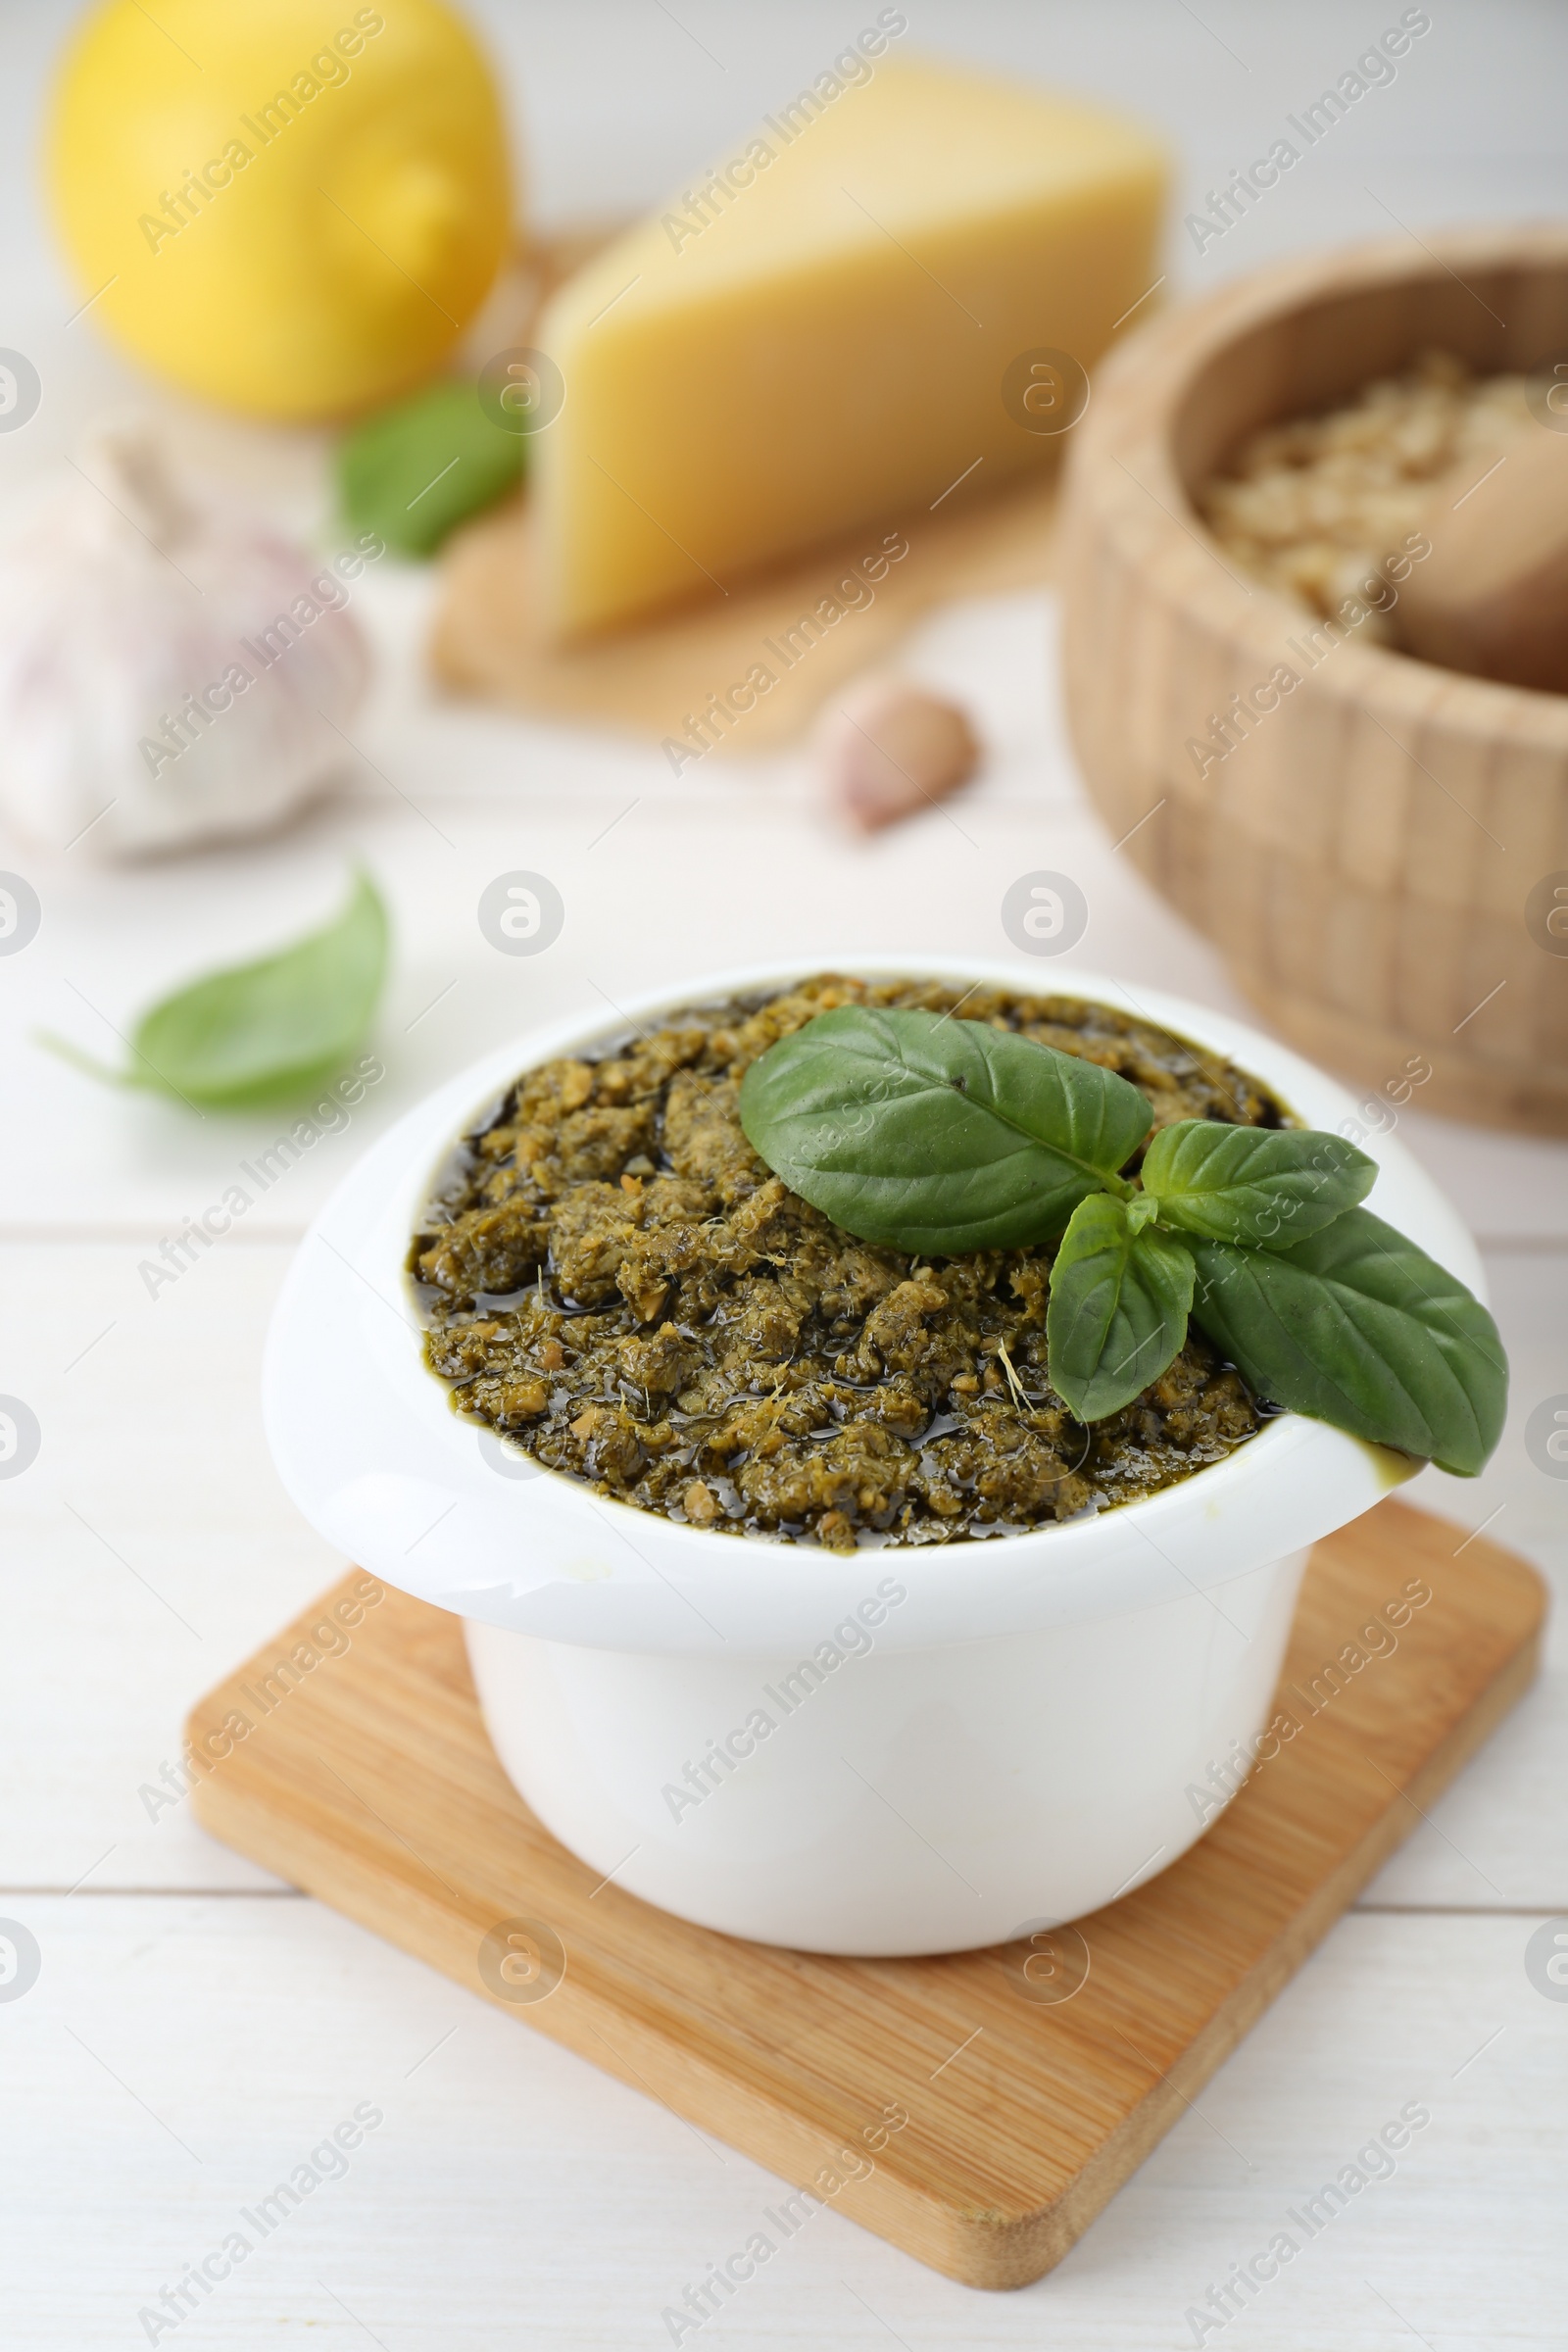 Photo of Delicious pesto sauce in bowl and ingredients on white wooden table